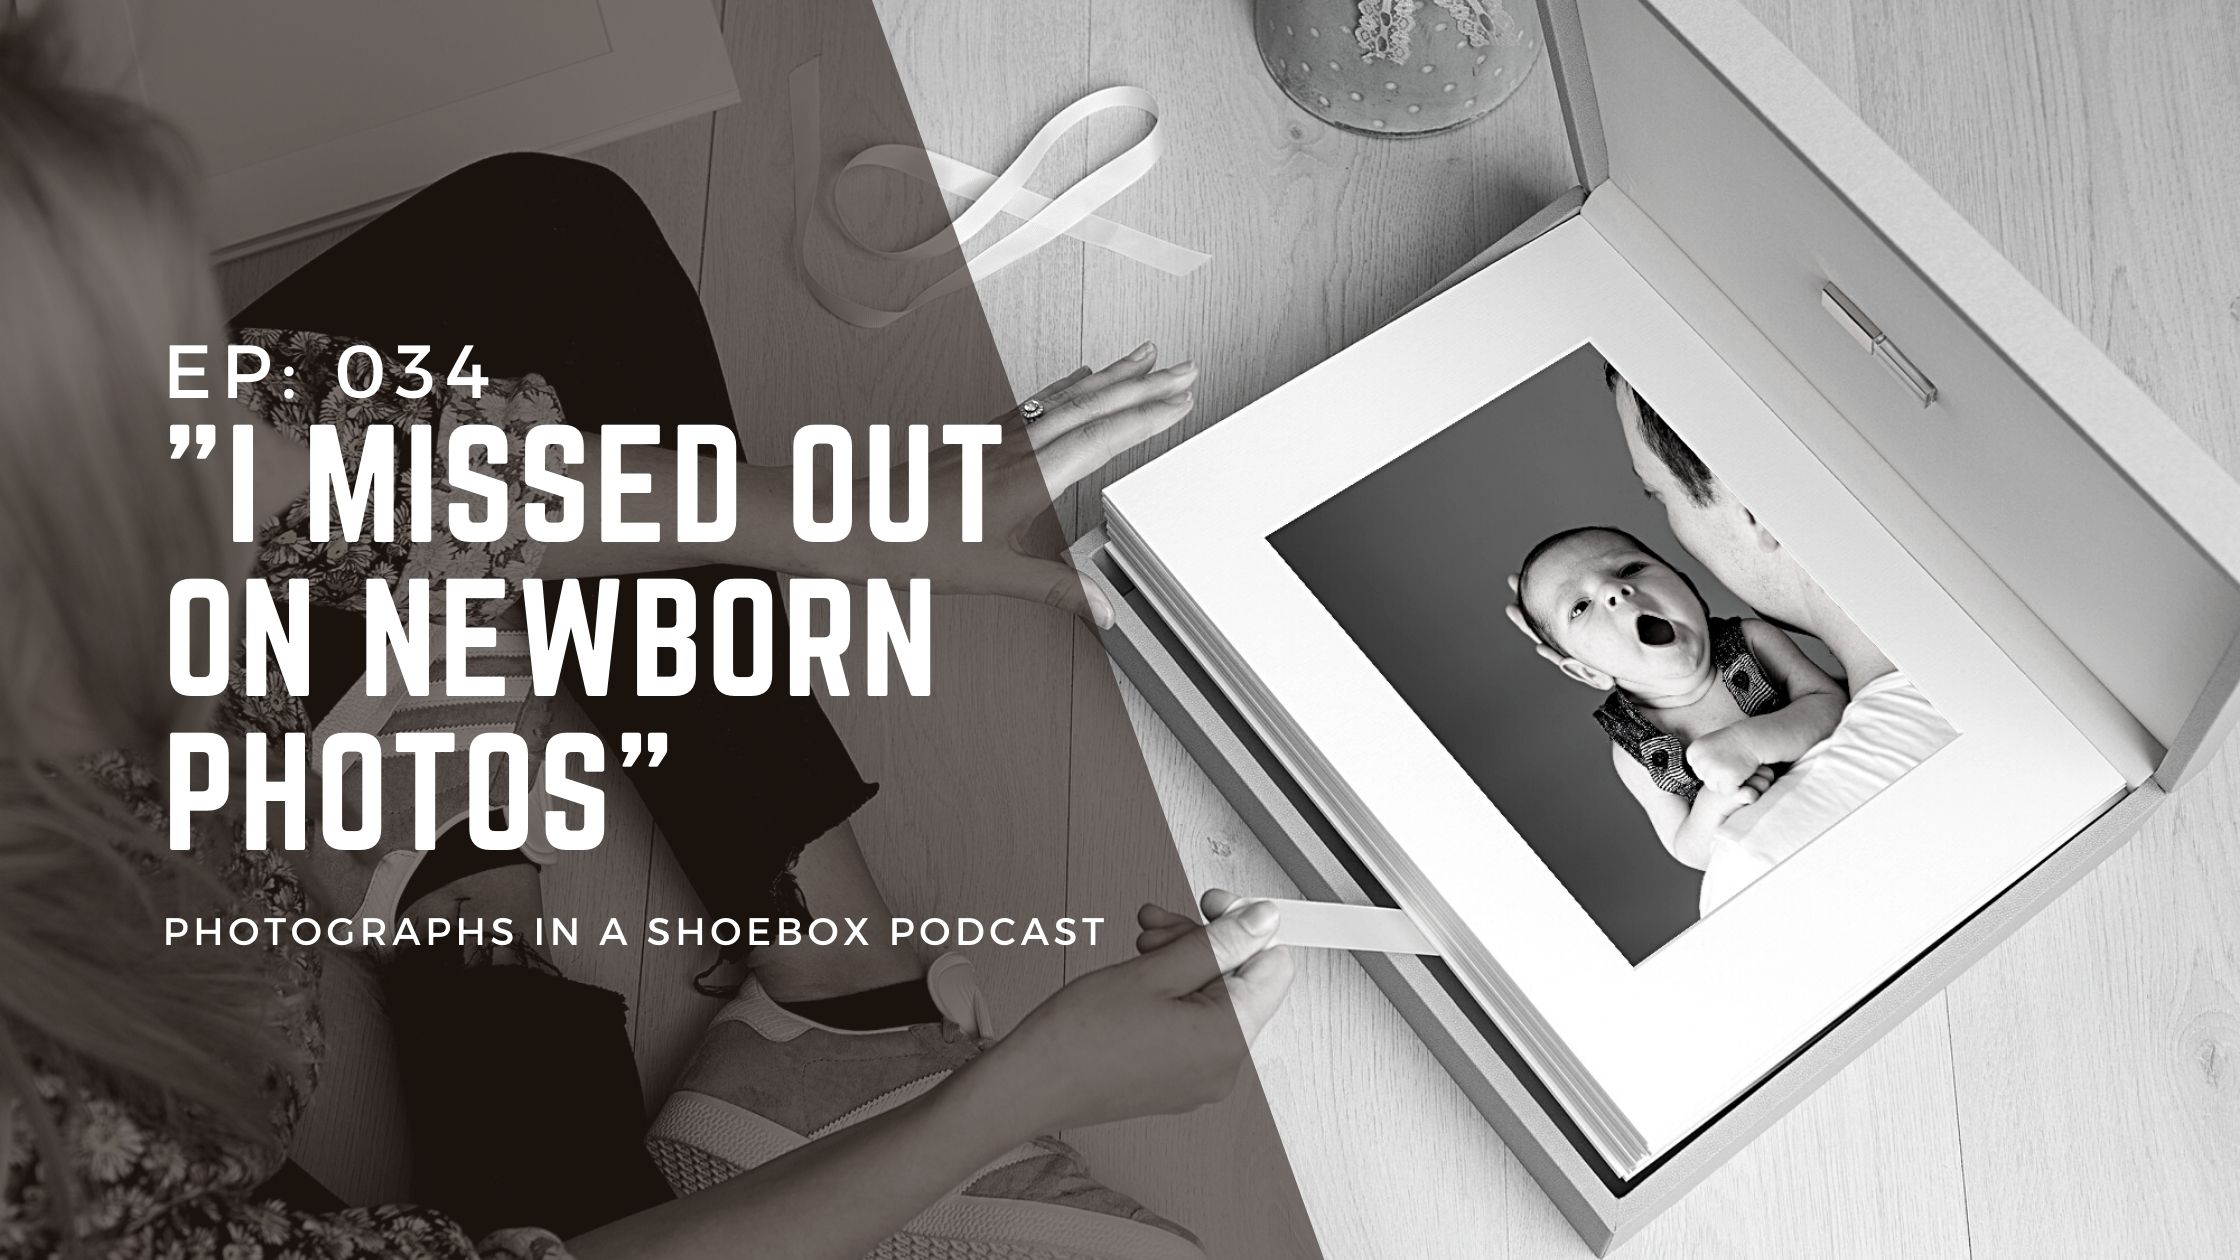 podcast episode artwork for "I missed out on newborn photos"